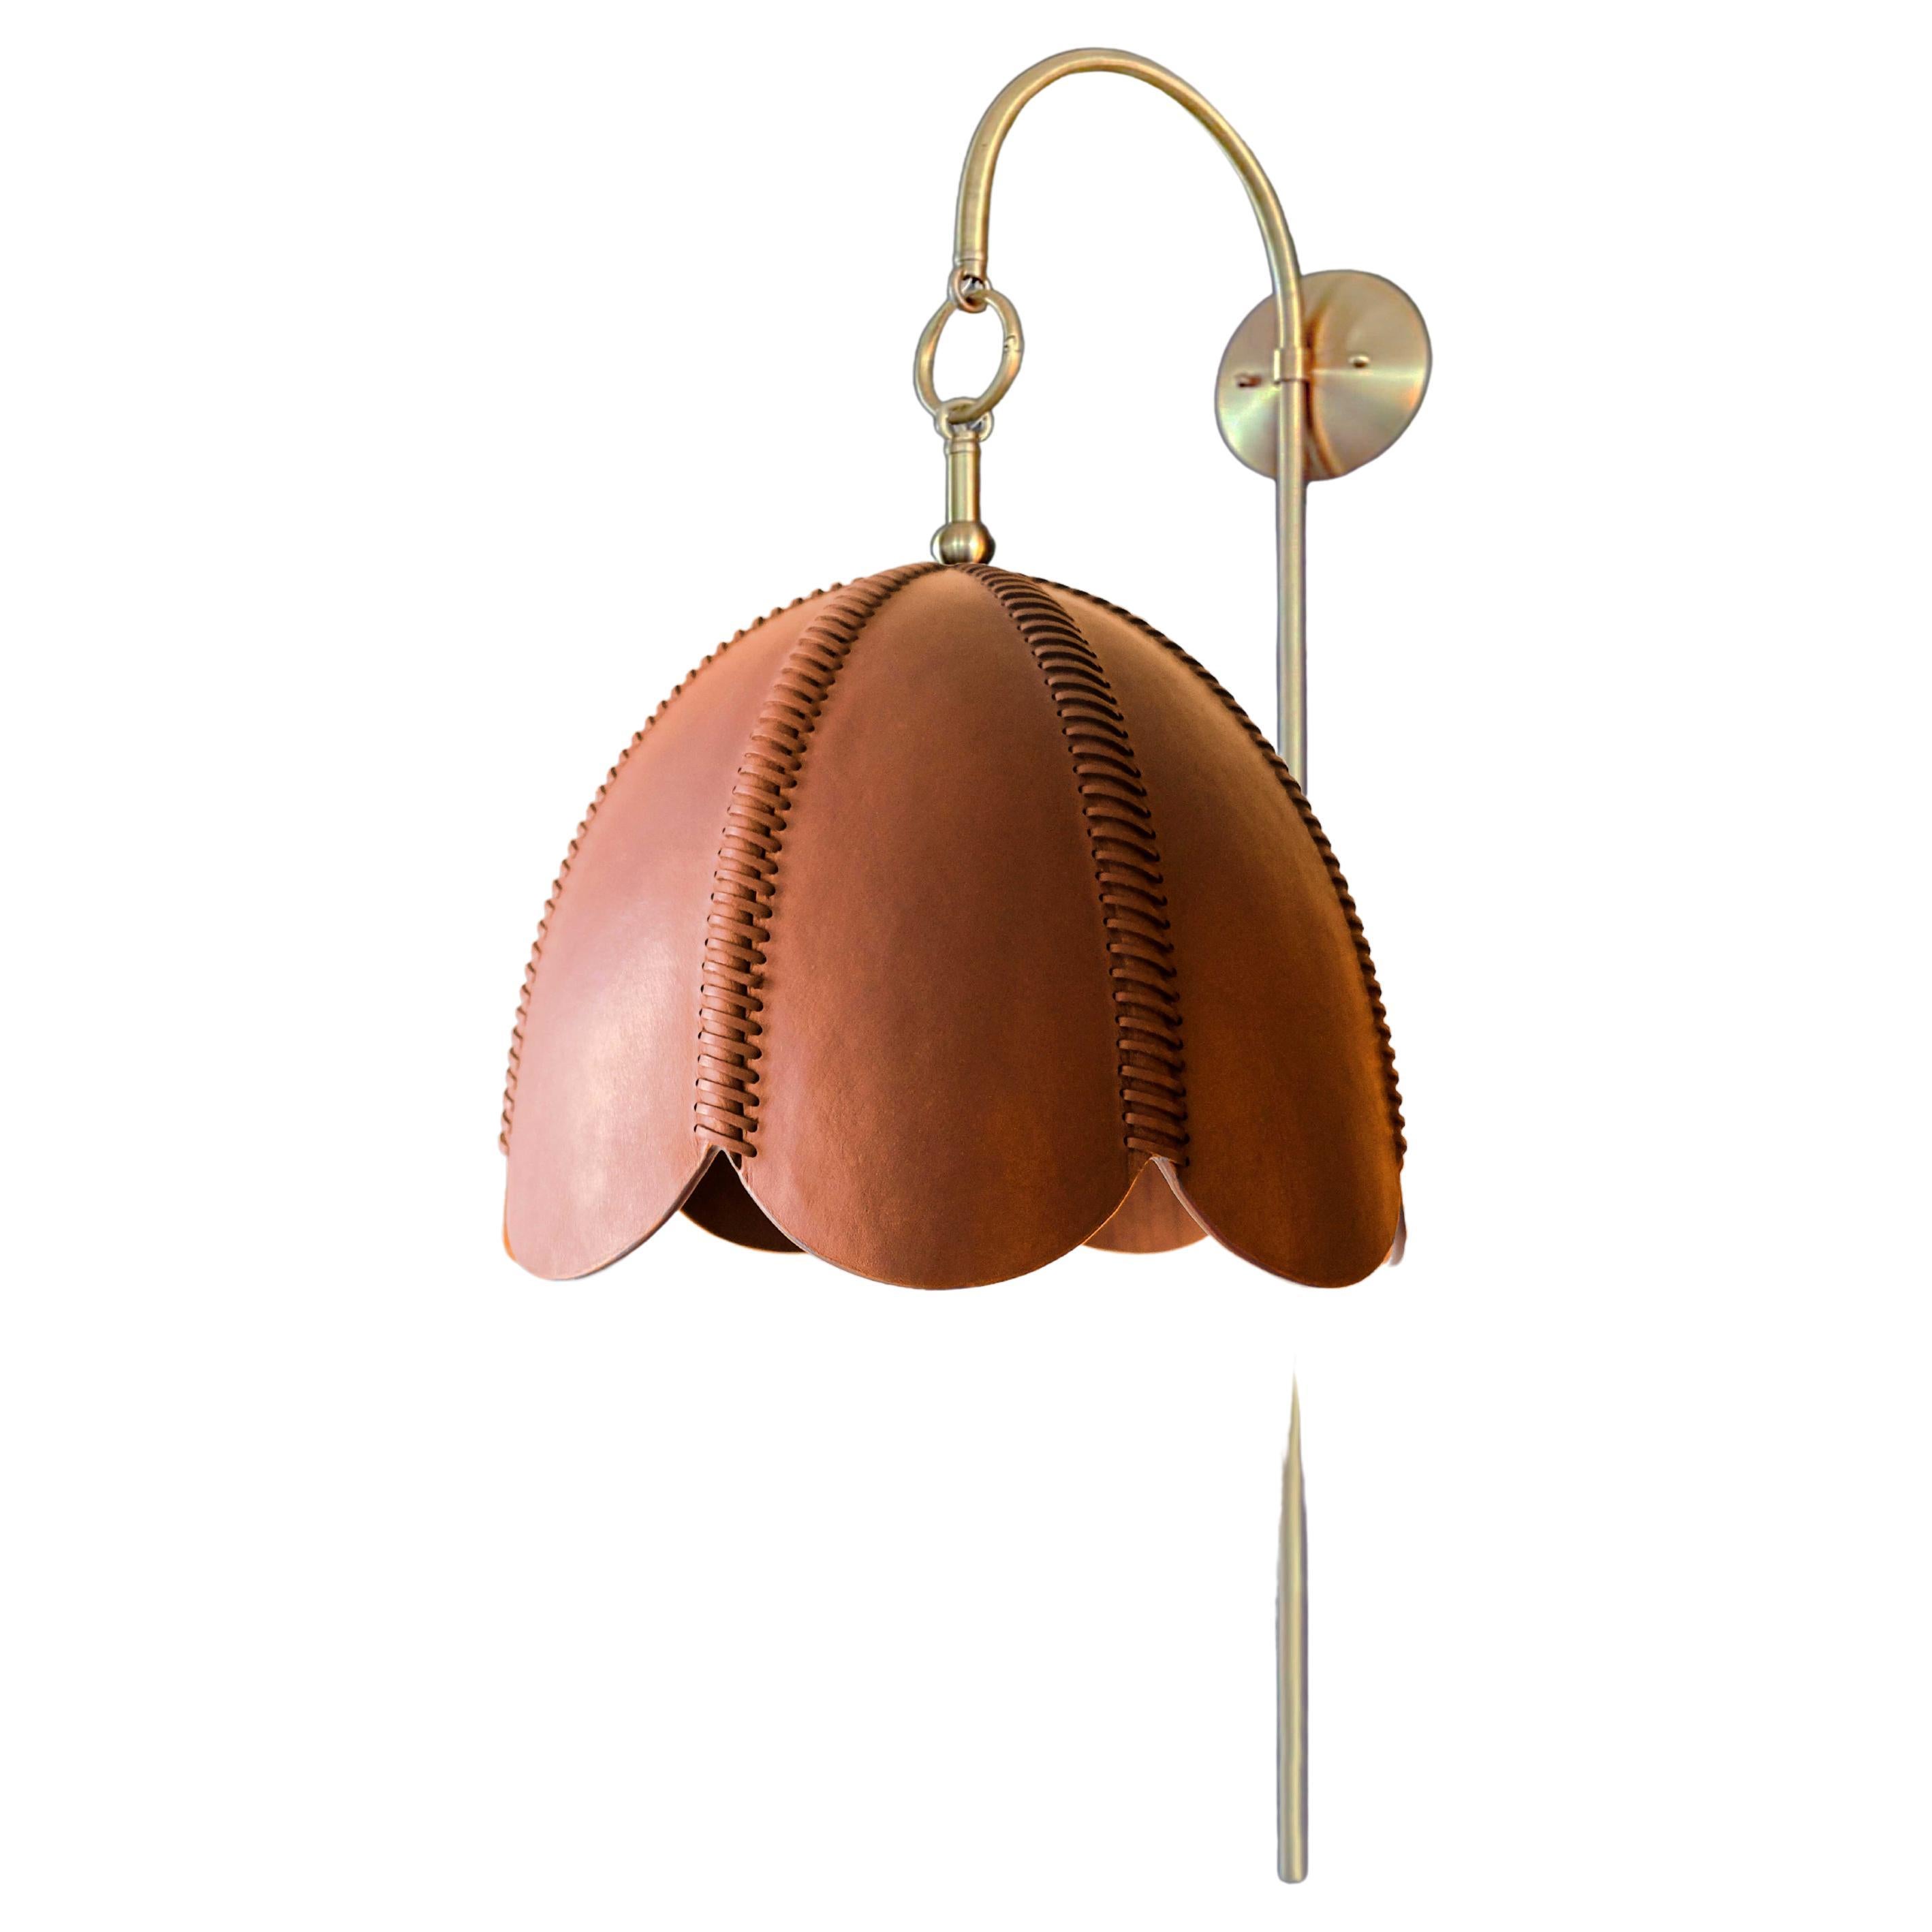 Leather Arched Sconce, Camel, Large, Doma, Saddle Lamp Collection For Sale